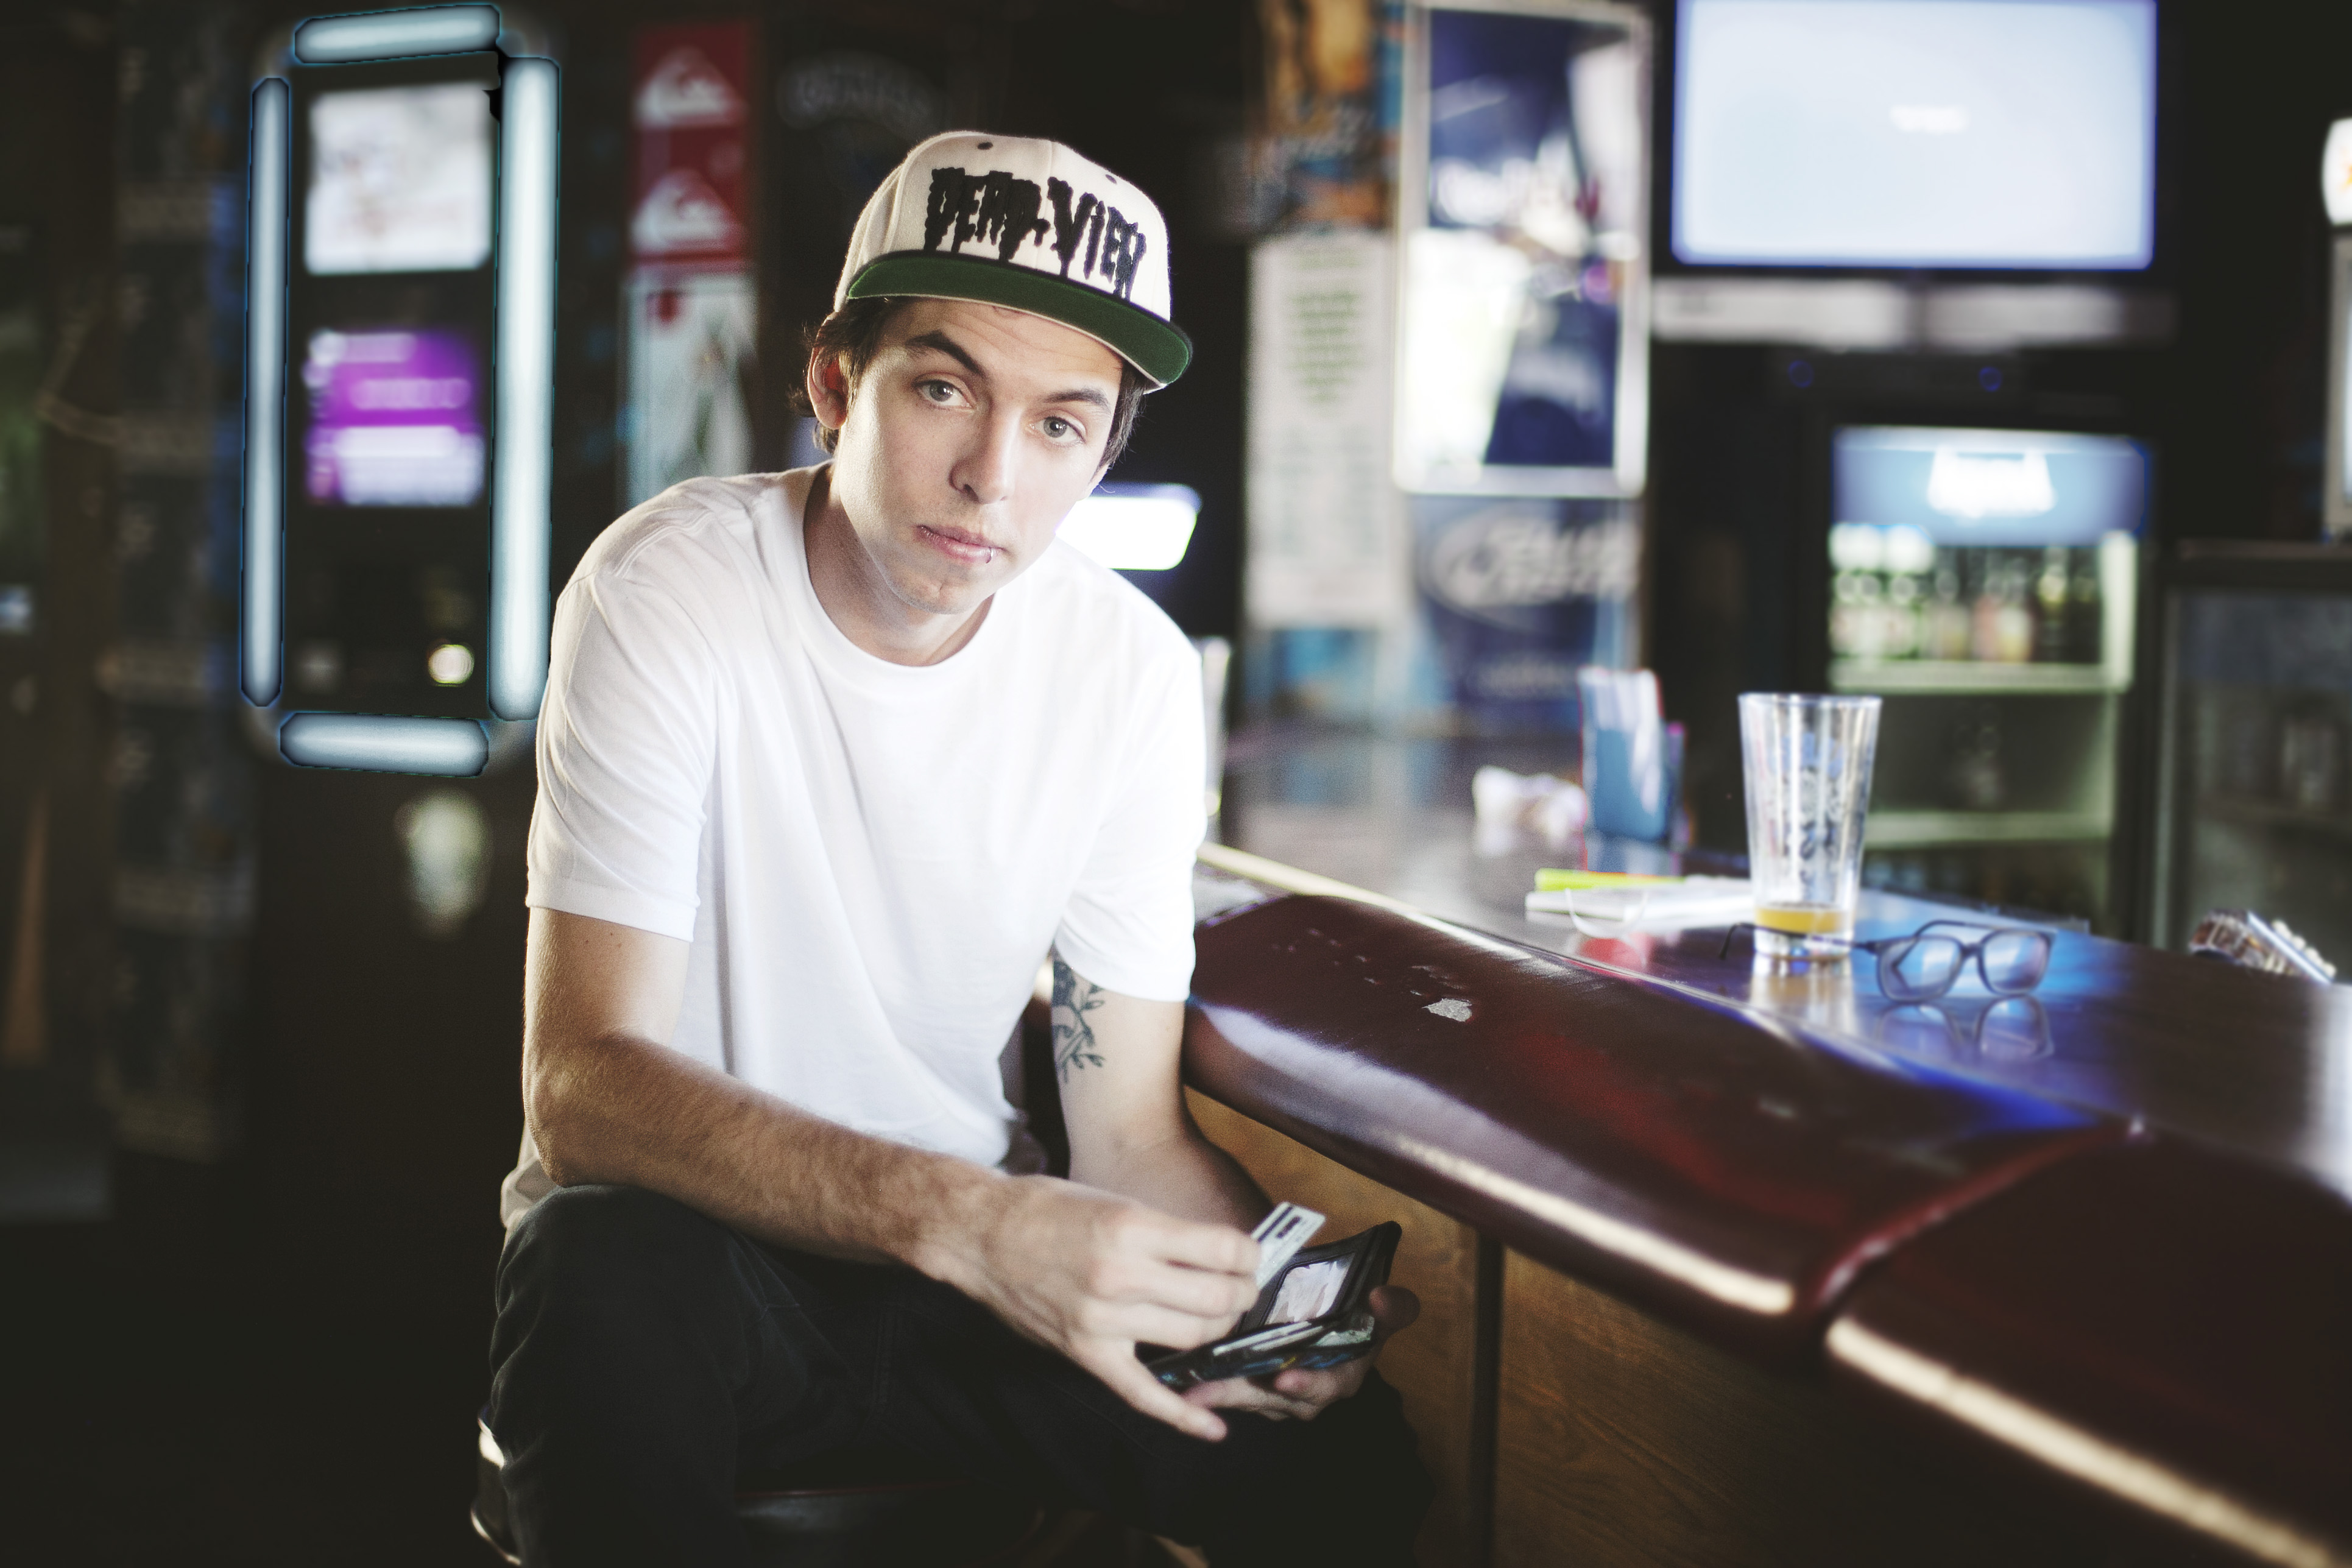 Grieves at Aggie Theatre